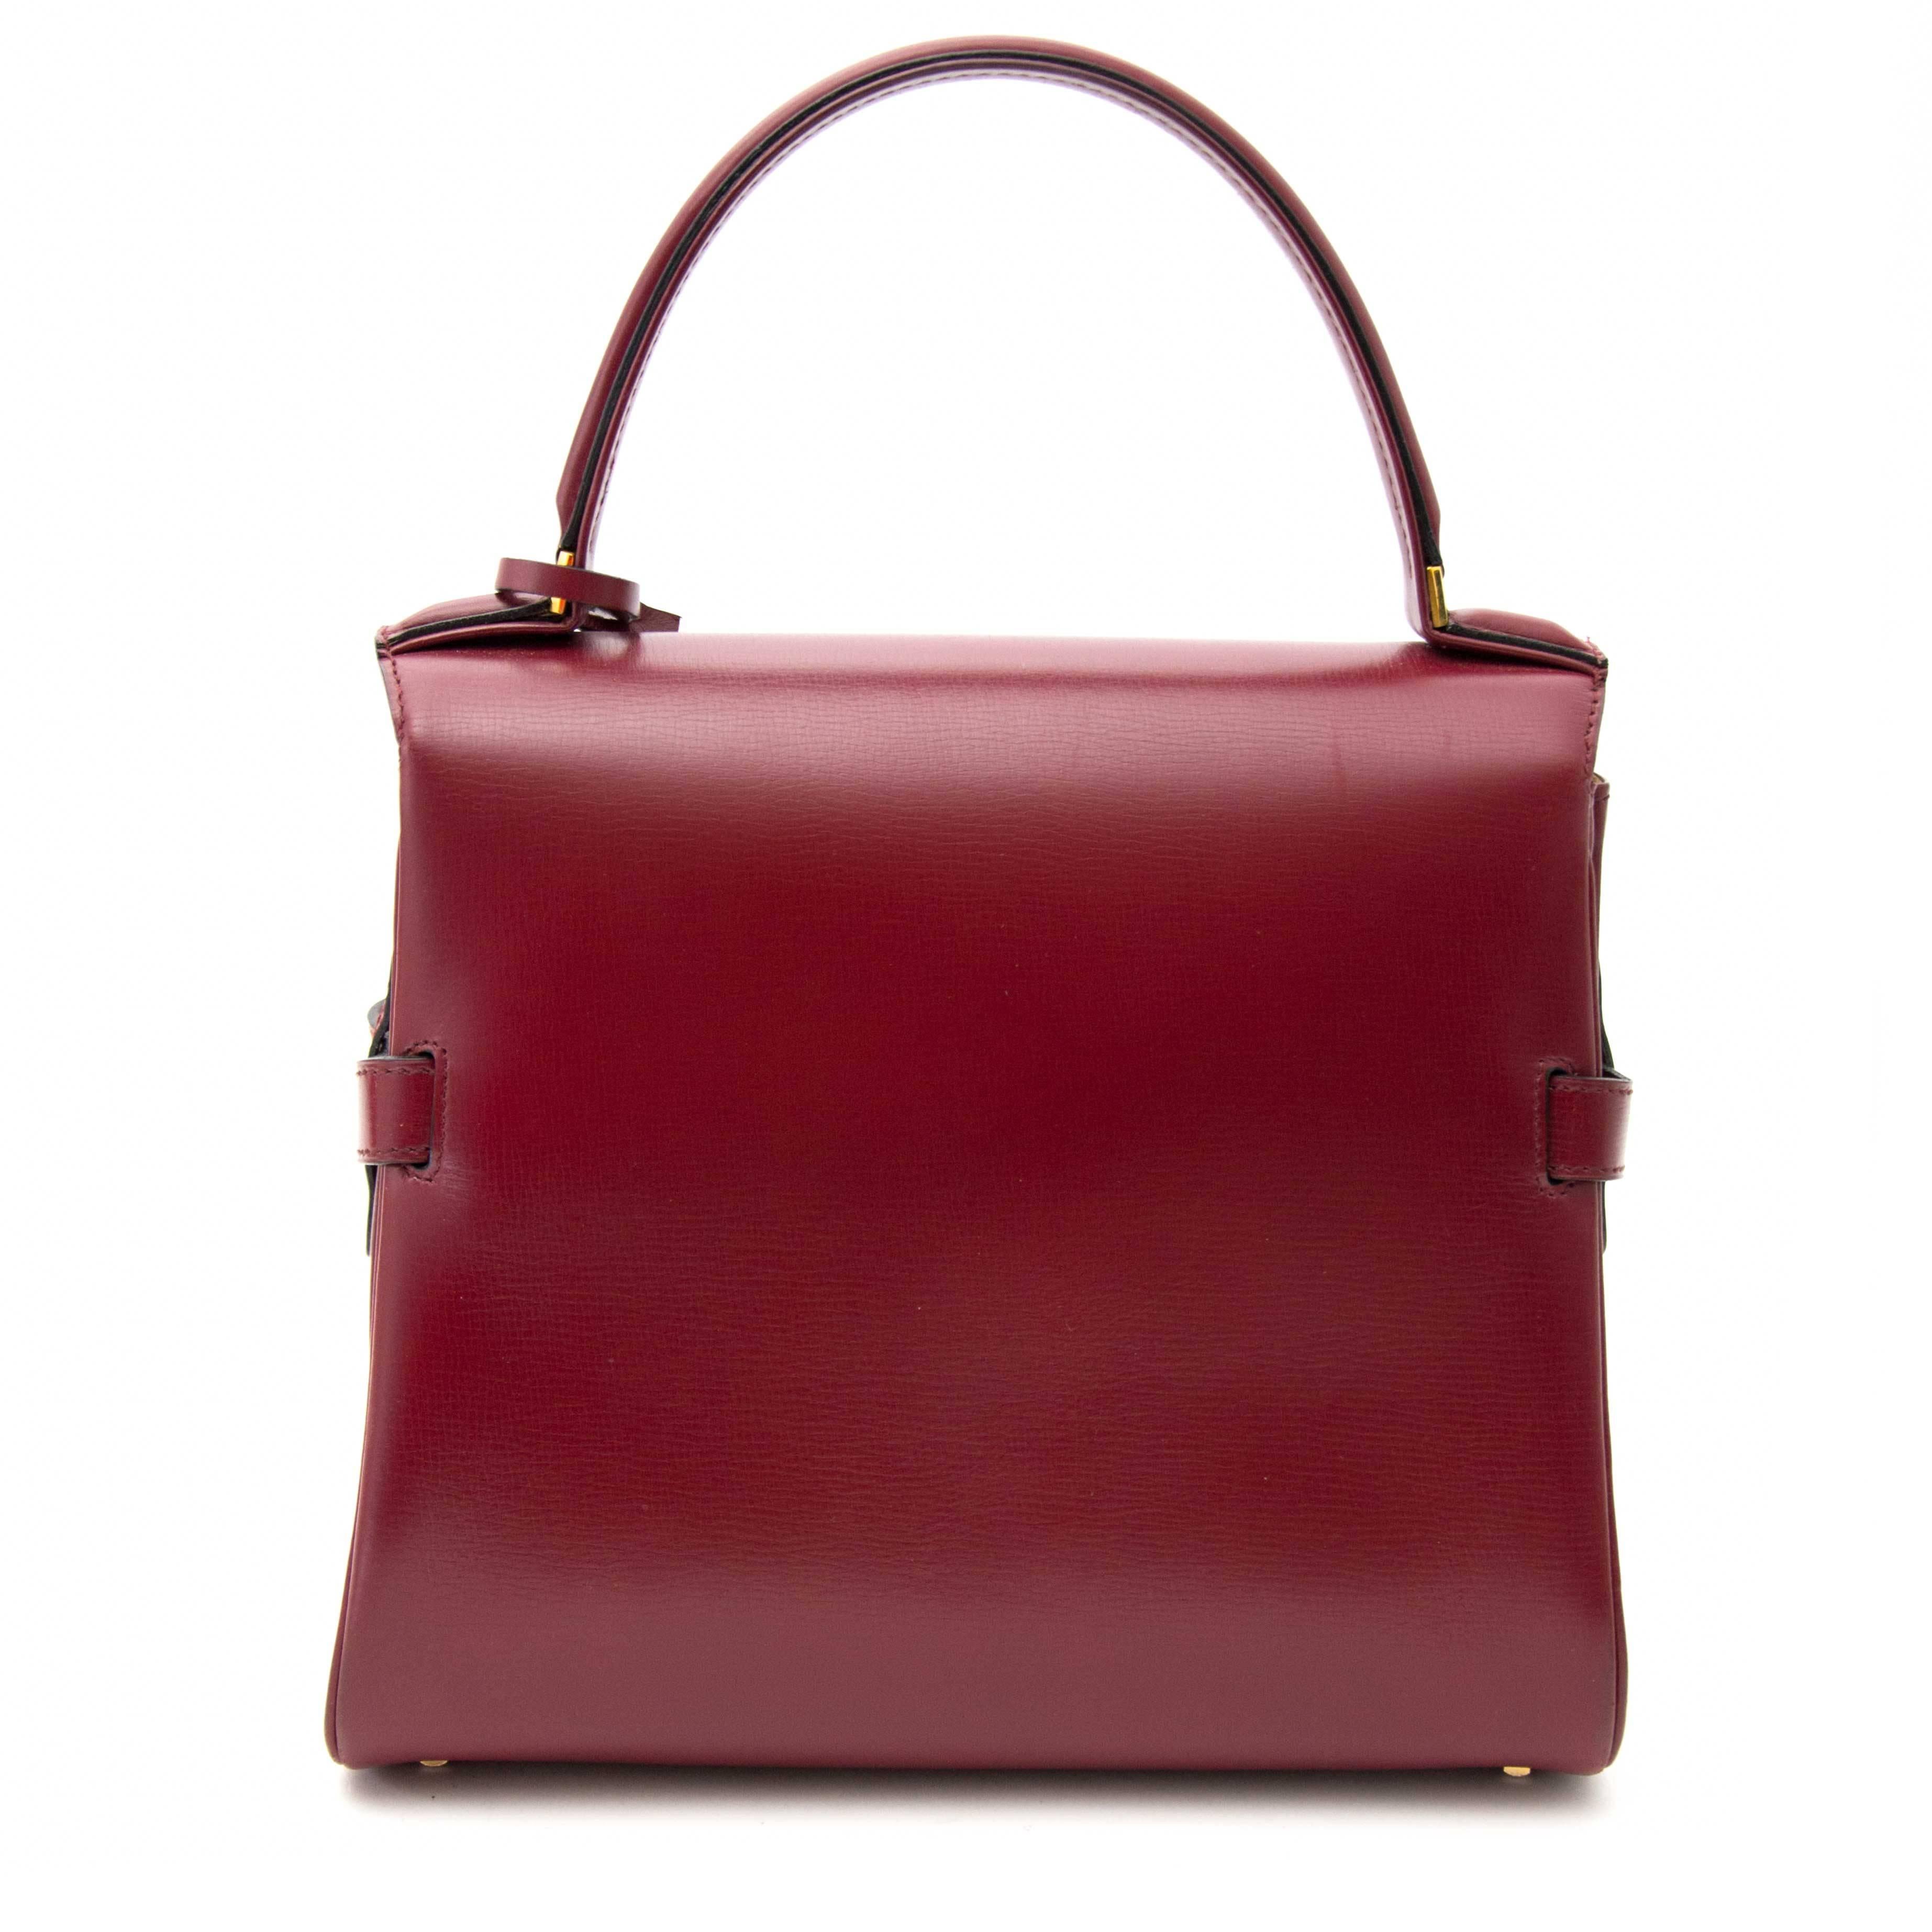 In excellent condition

Delvaux Bordeaux Tempête PM Top Handle Bag

This lovely warm Bordeaux lambskin leather bag from Delvaux is a true charmer. This beautiful bag features gold toned hardware, on the inside there is one side-pocket. This bag